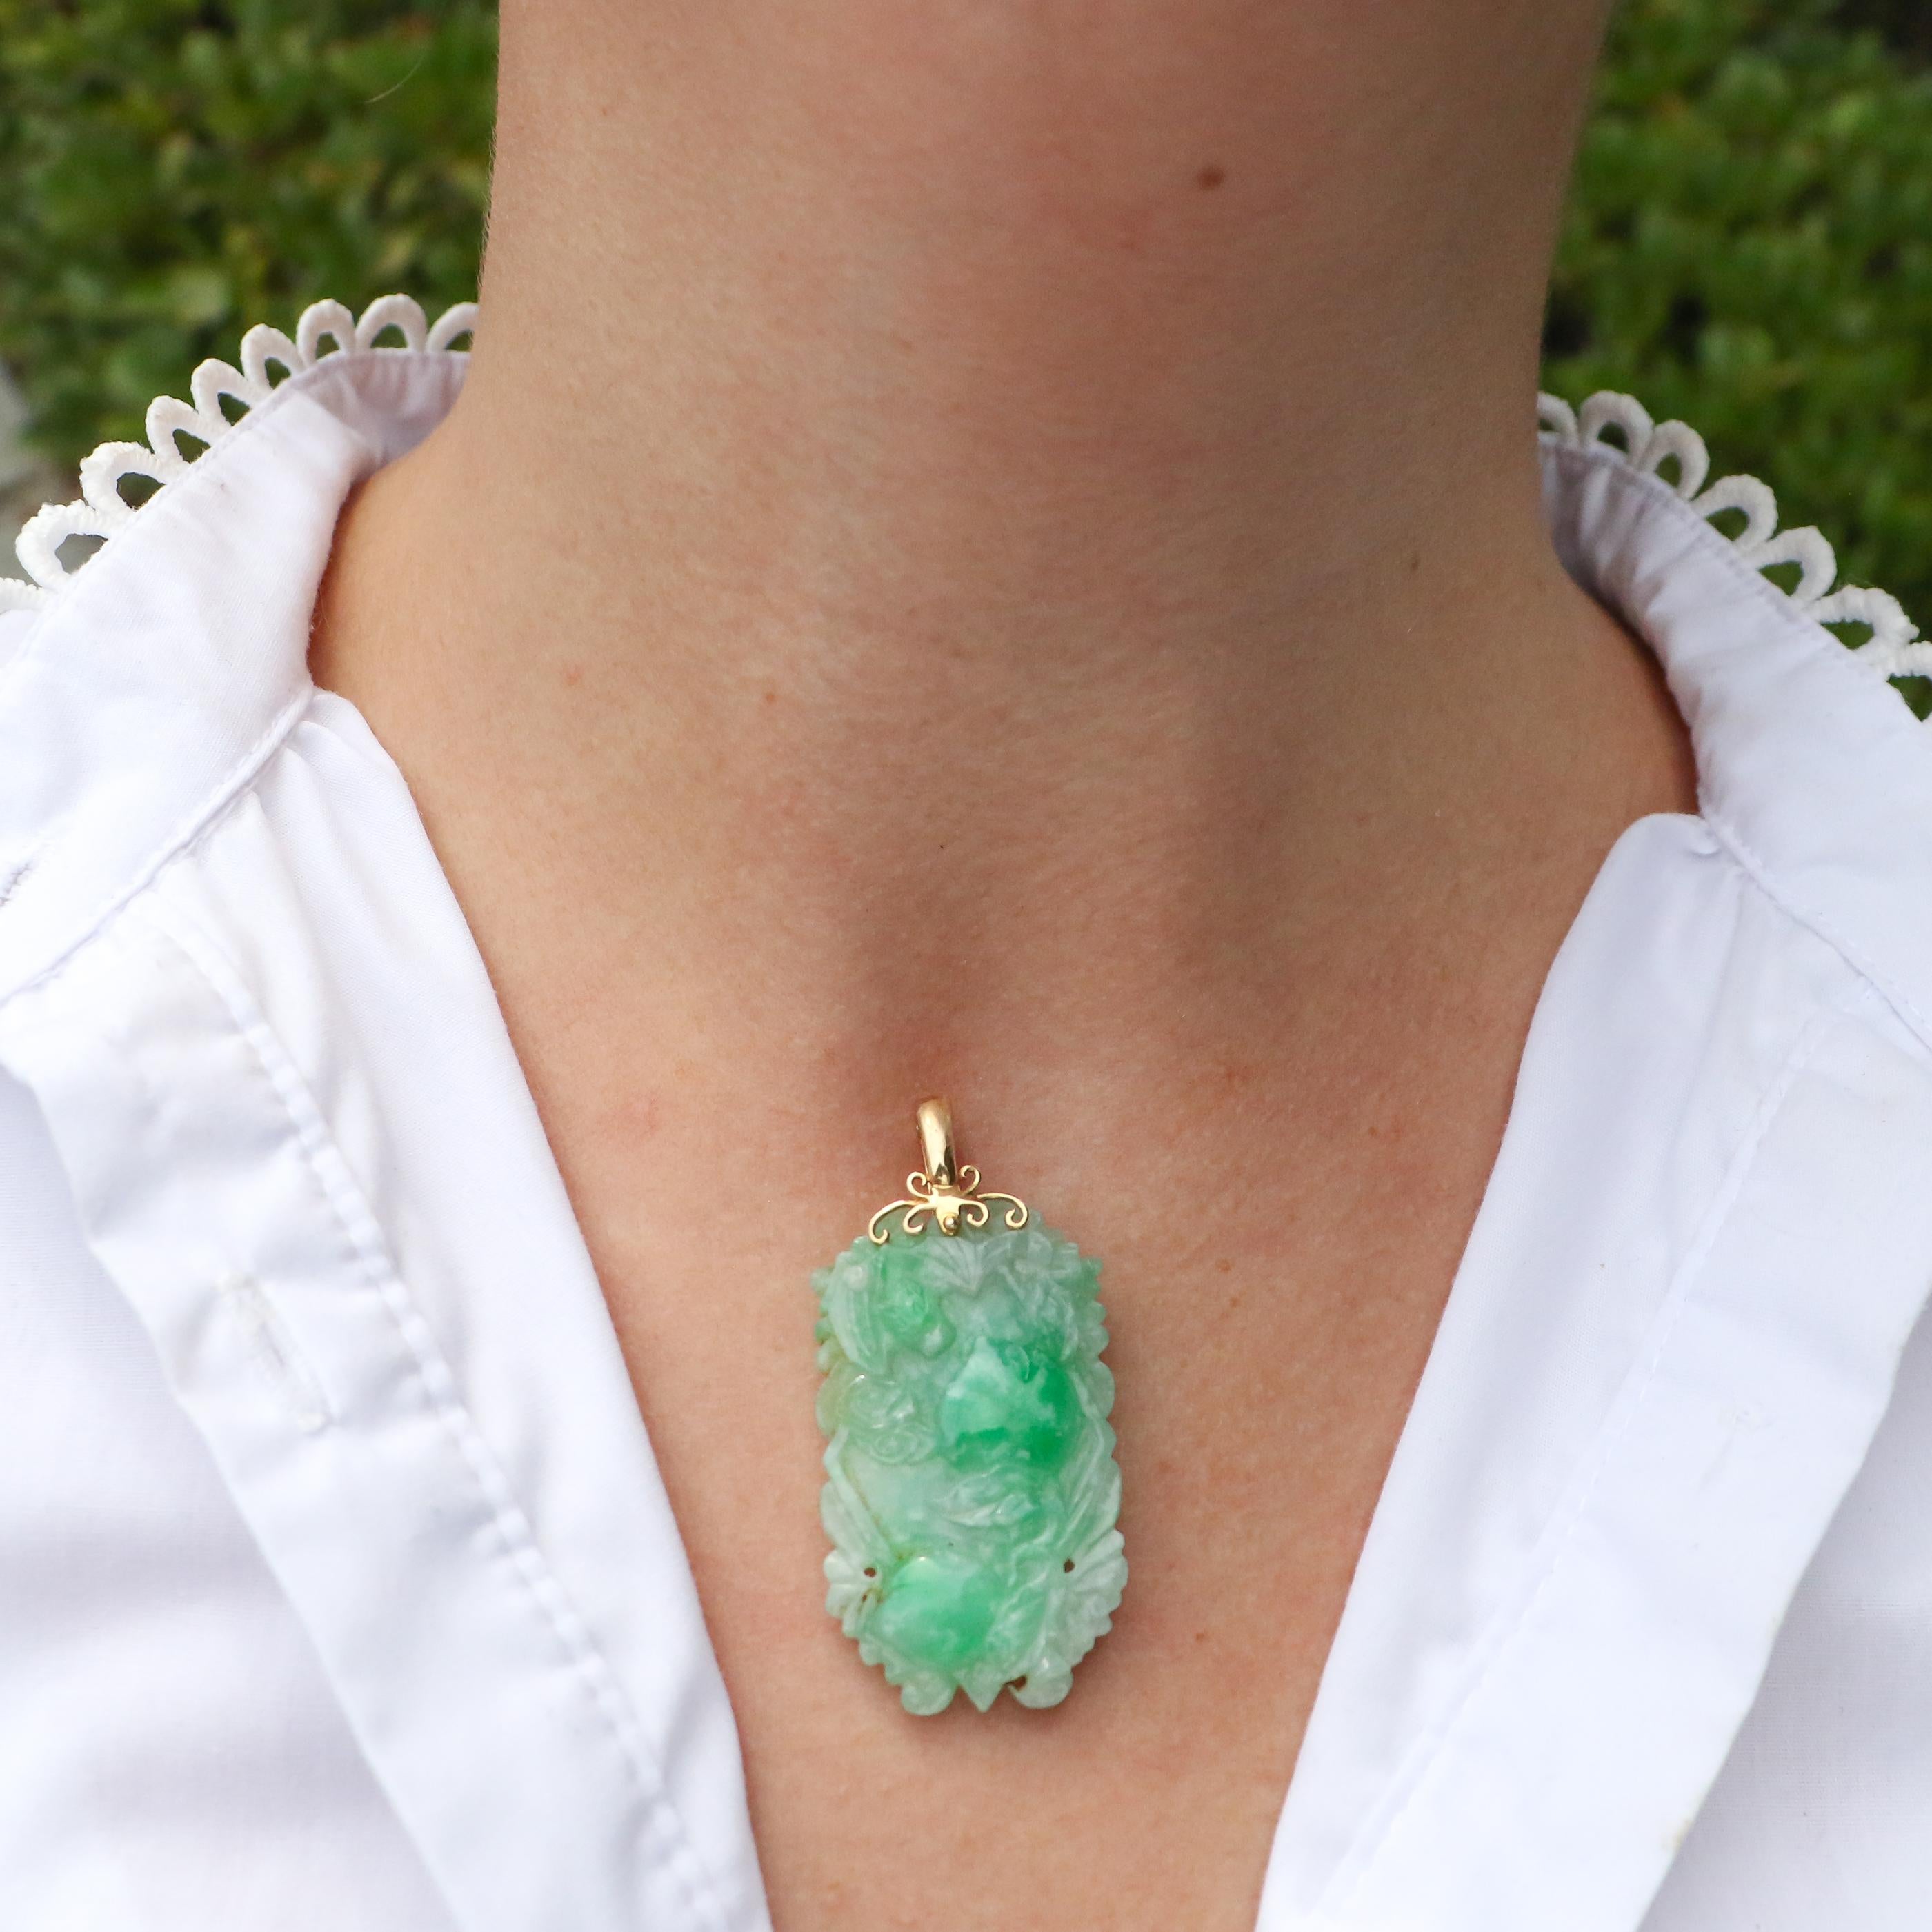 Apart of the wide variety of jewelry we have for sale, this carved jade pendant shows the intricate craftsmanship that goes into created pieces of this magnitude. With its subtle floral patterns and stylistic dragons, this jade portrays more